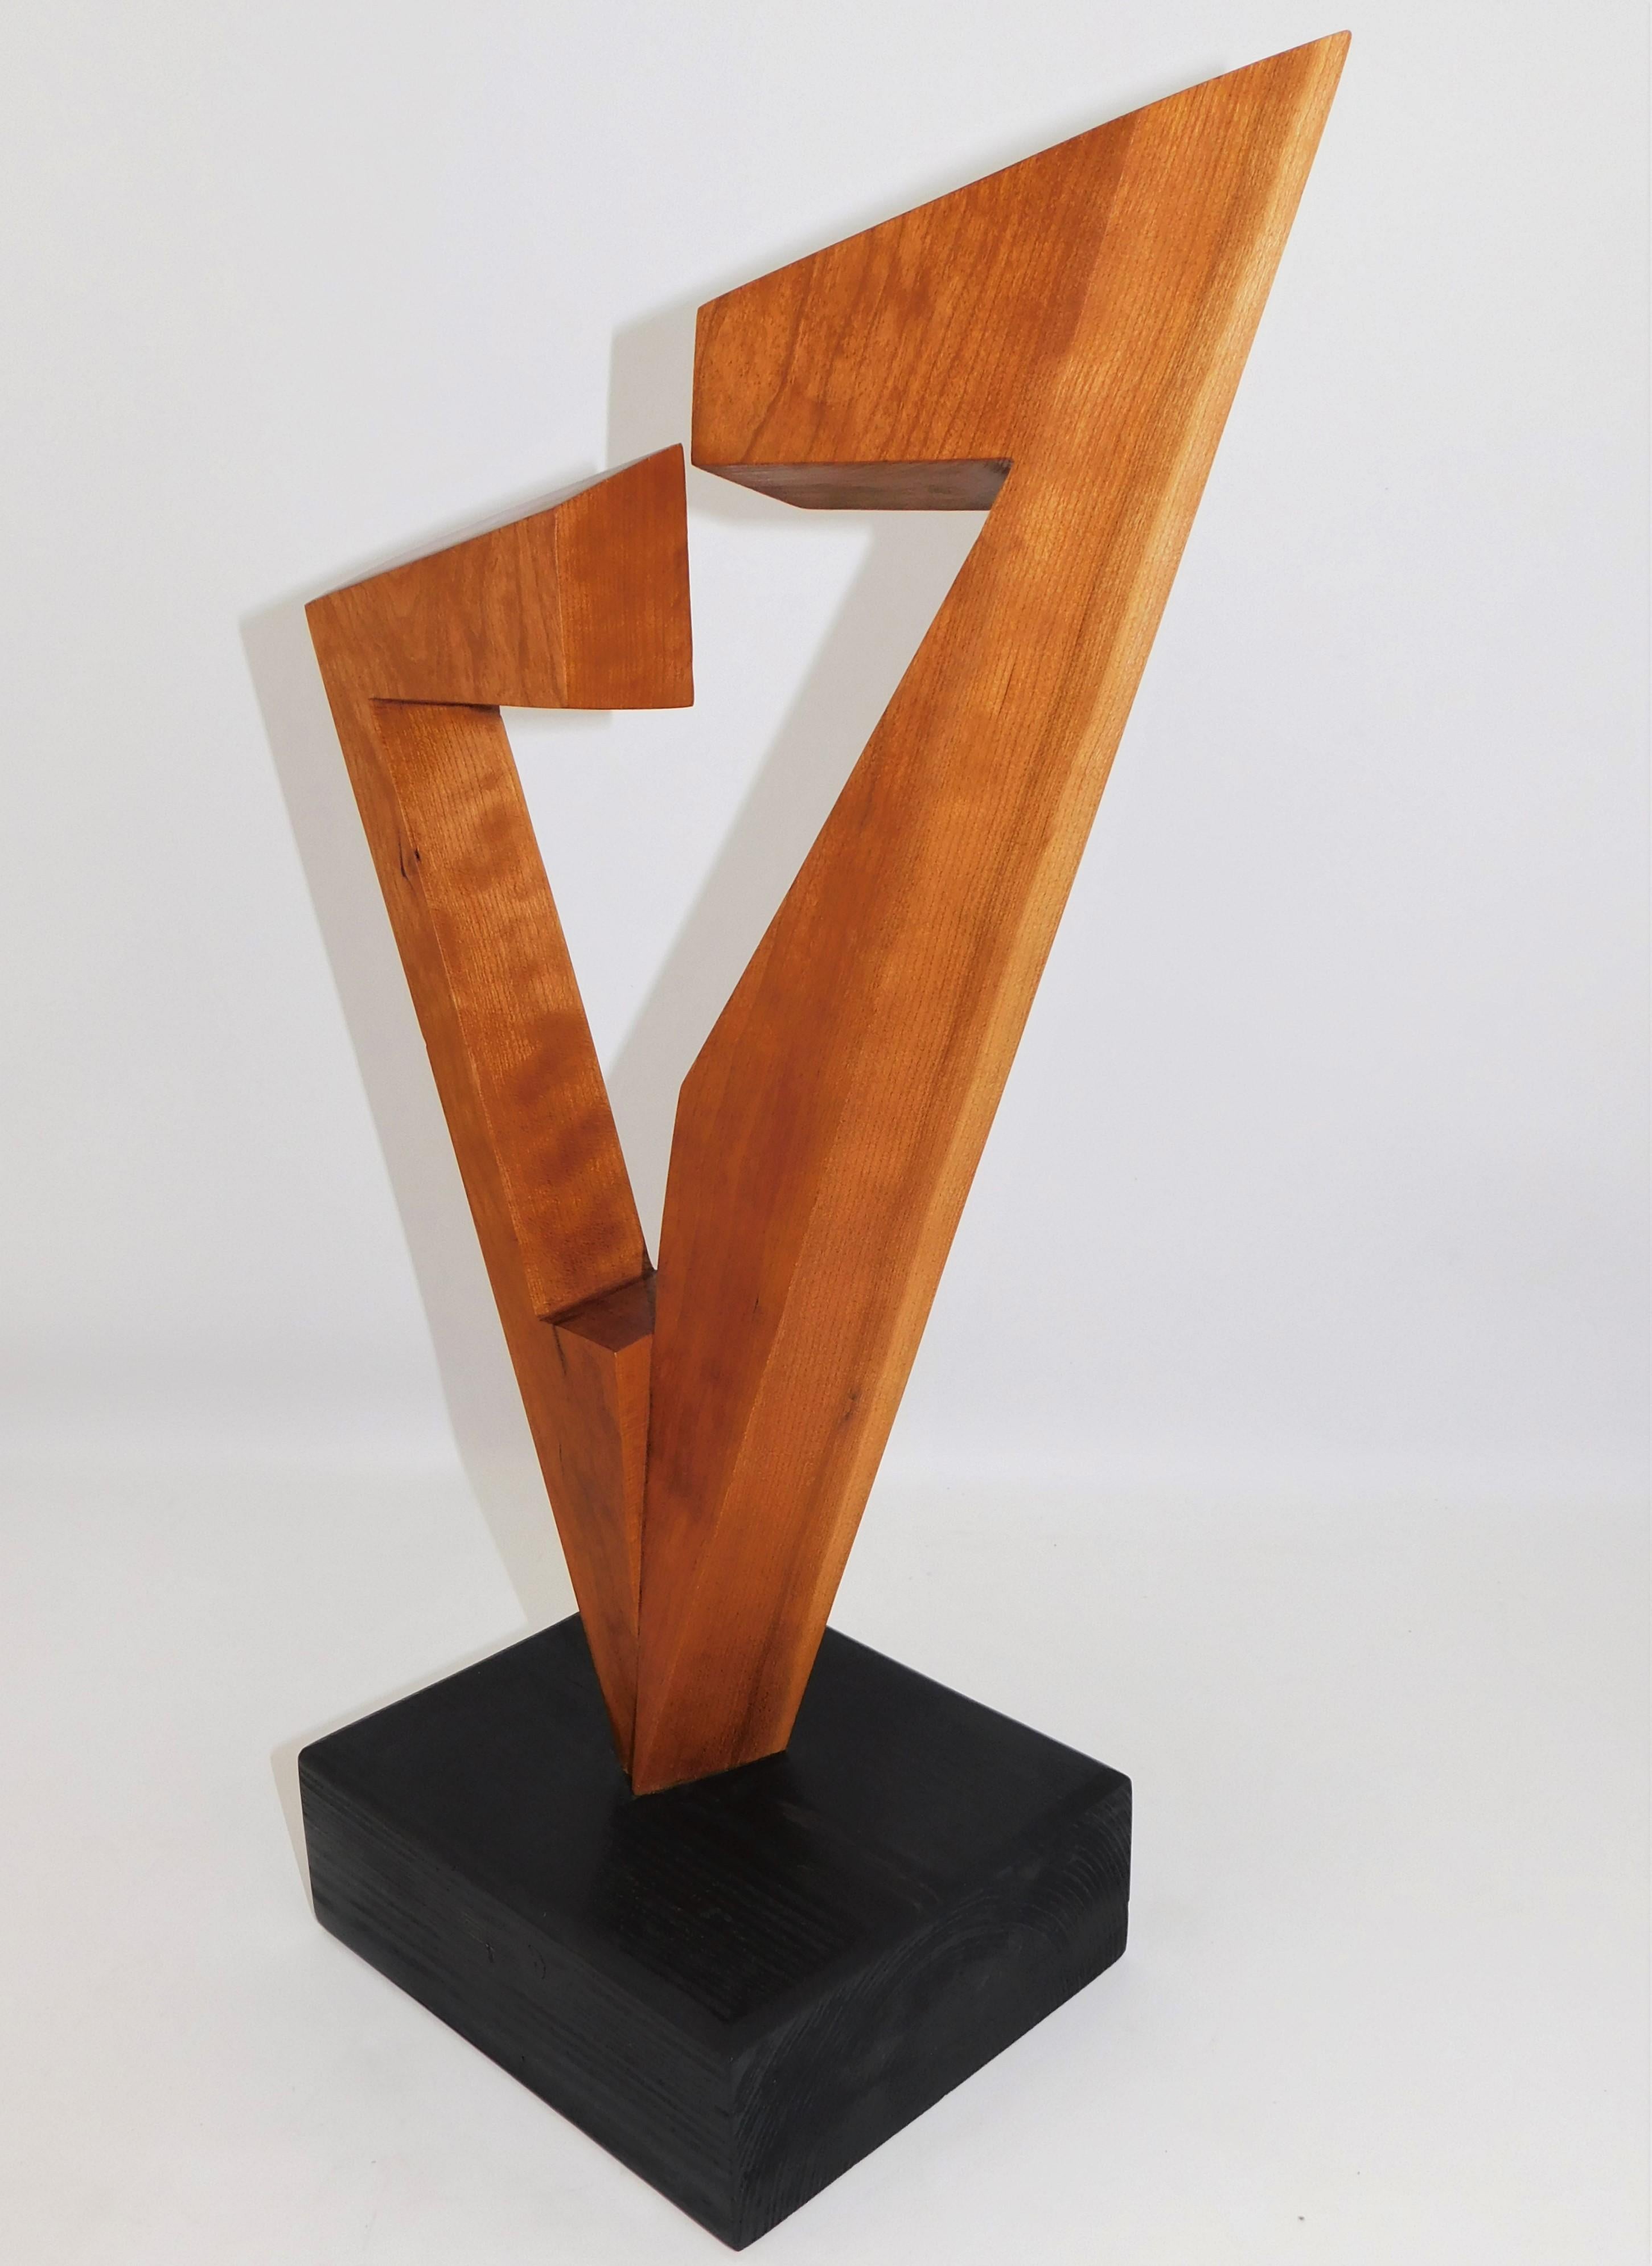 Canadian Signed Modern Abstract Constructivist Styled Cherry Wood Sculpture on Base